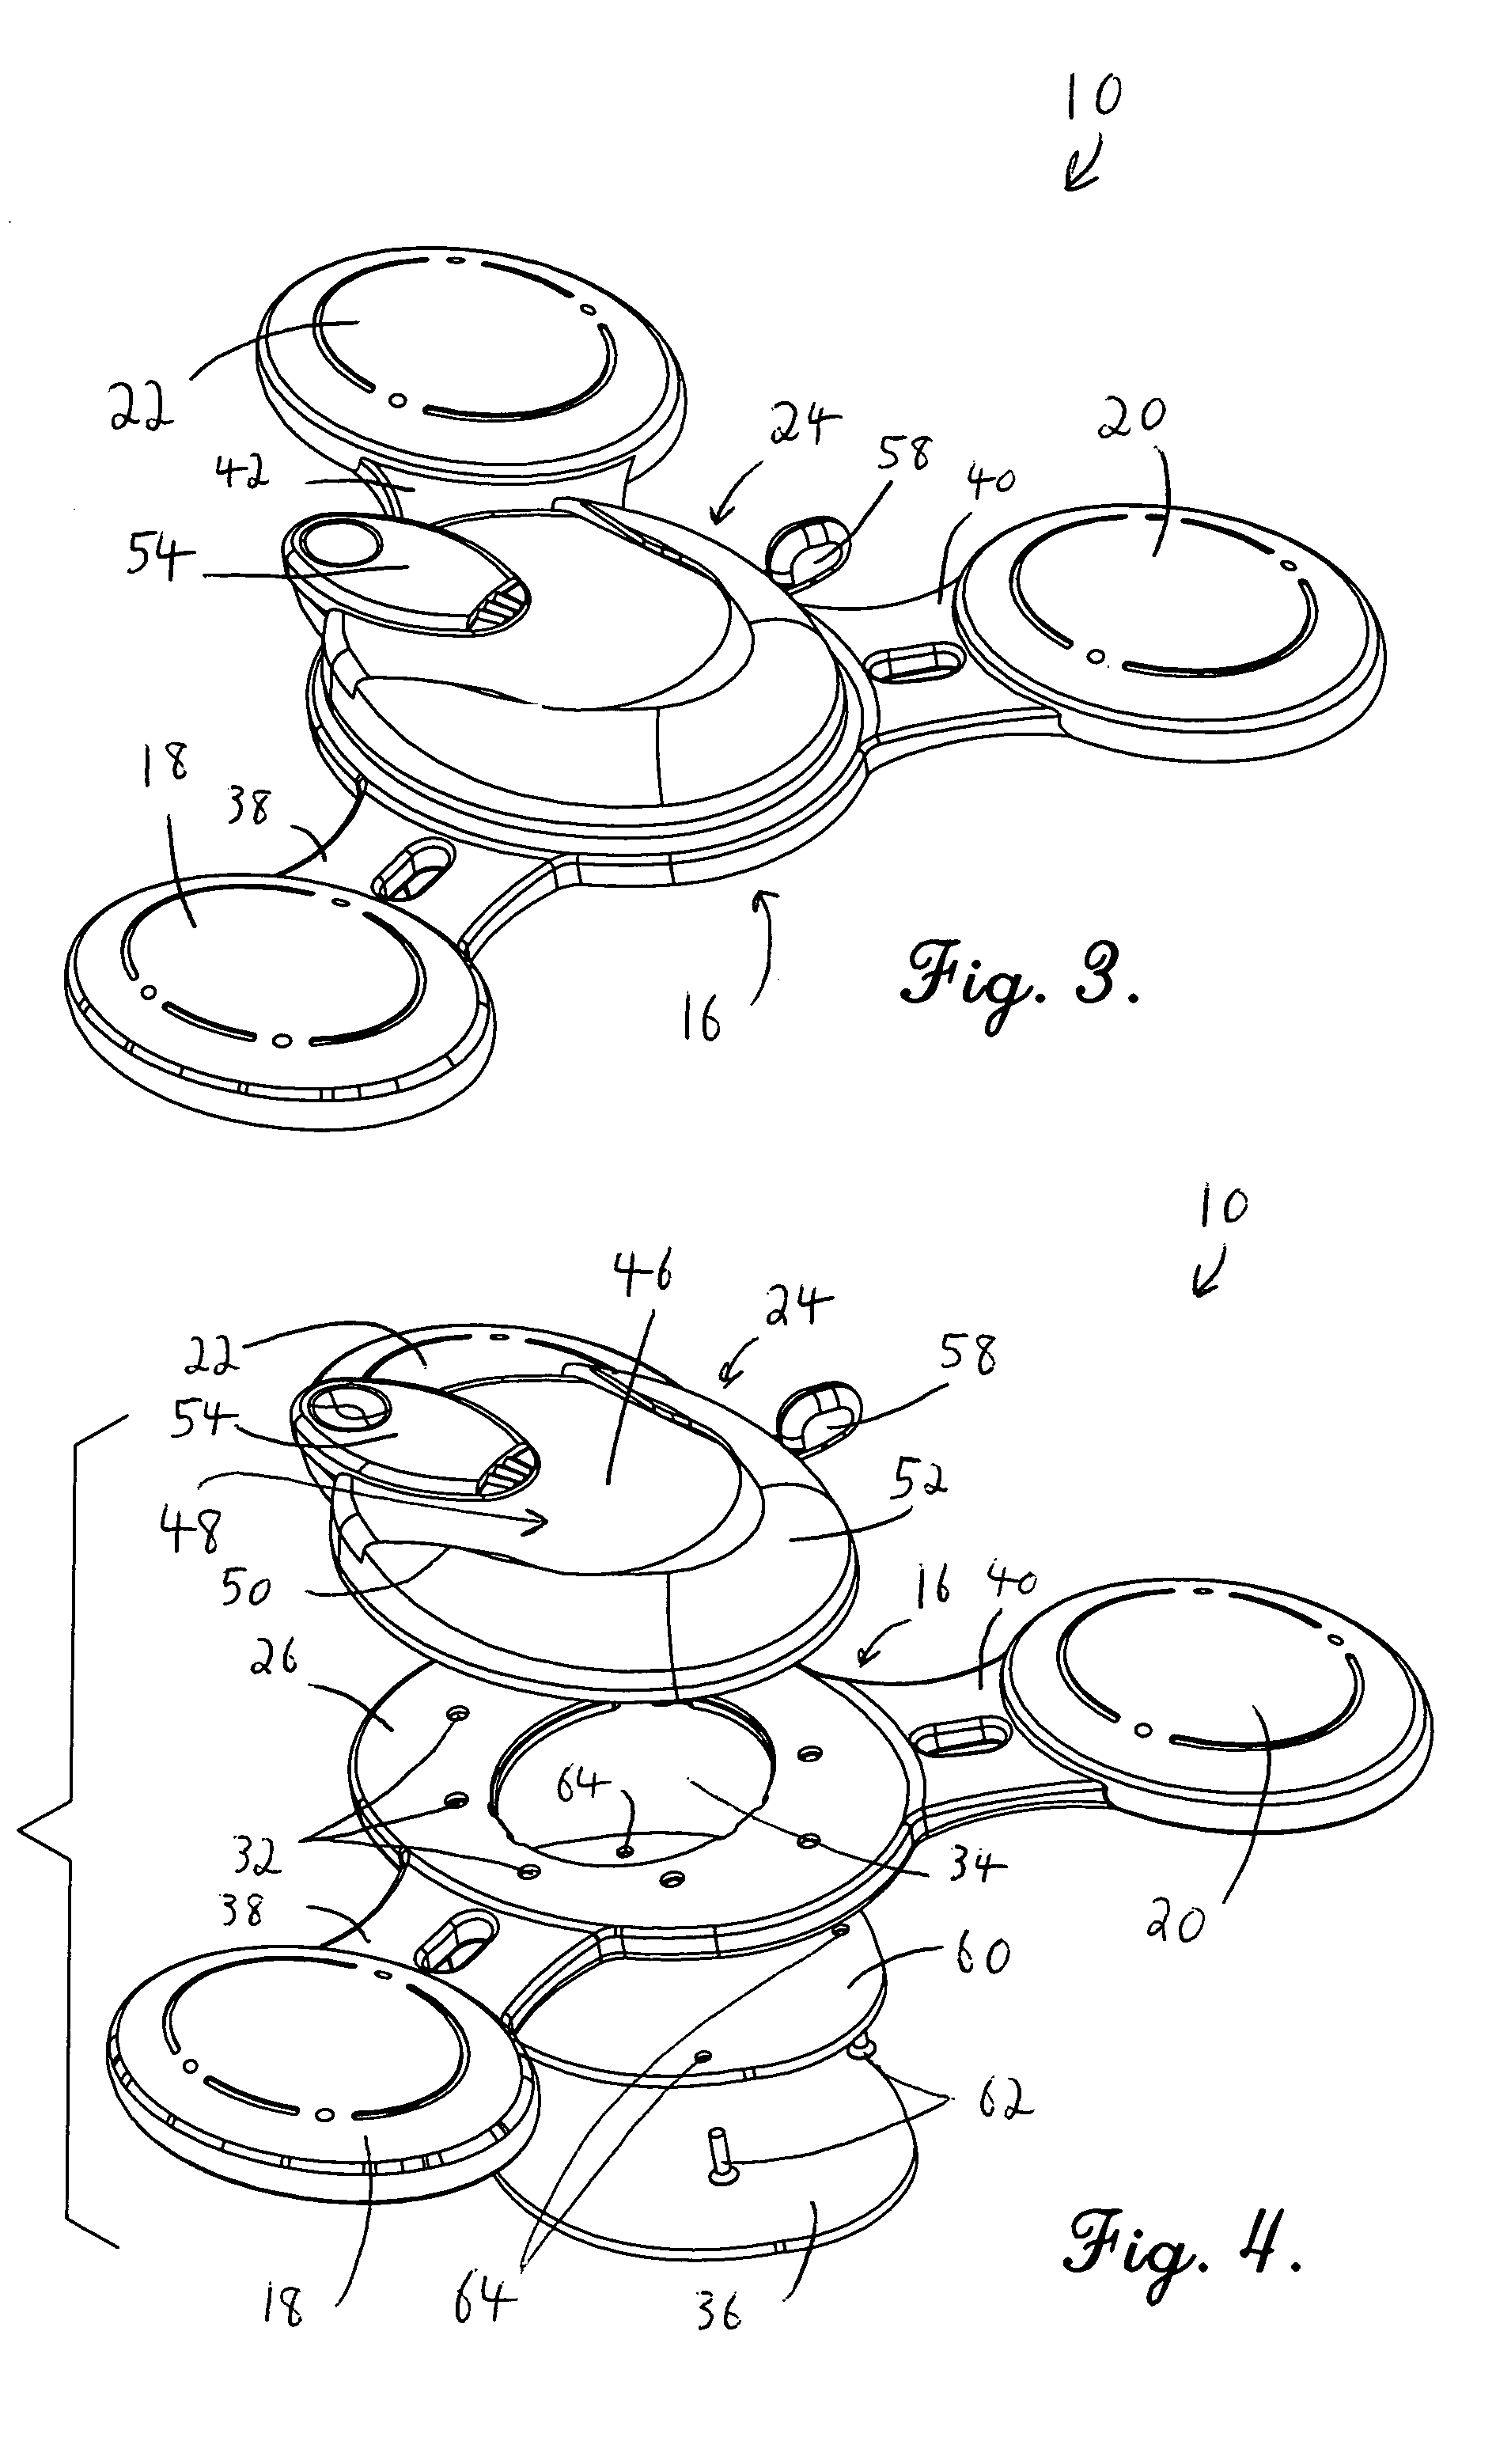 Friction mount apparatus for an electronic device